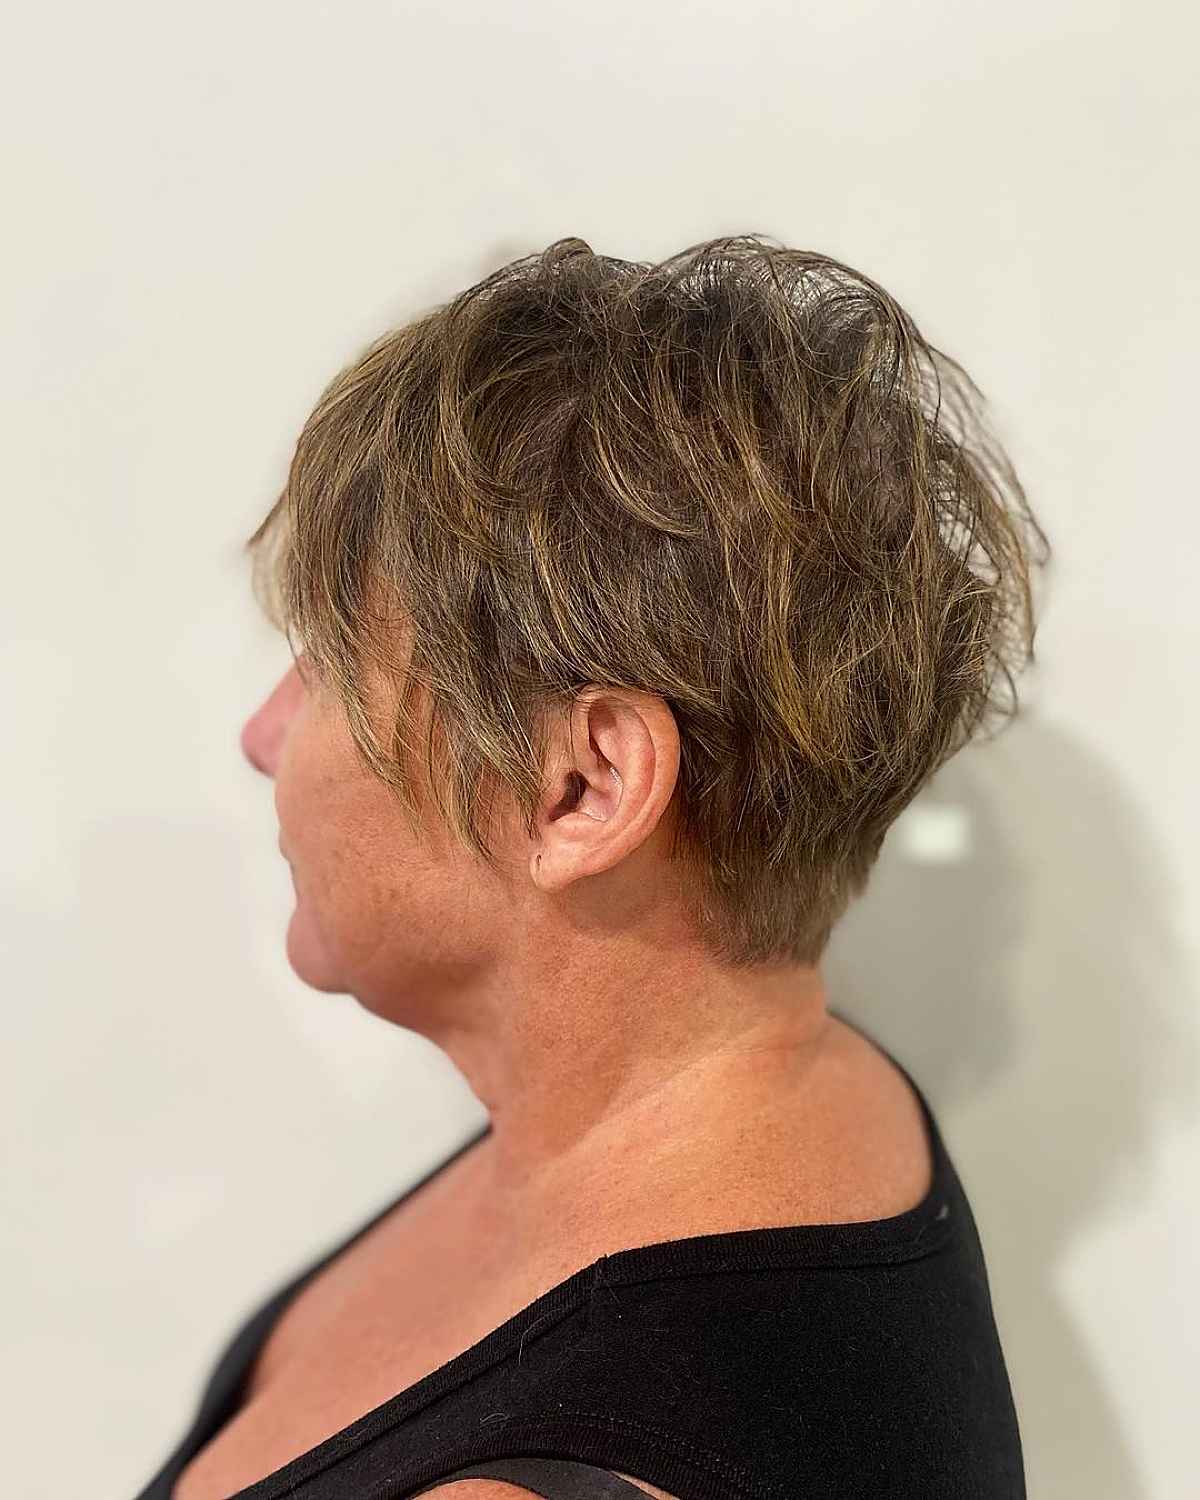 Younger-Looking Pixie Cut for Older Women with Thin Hair